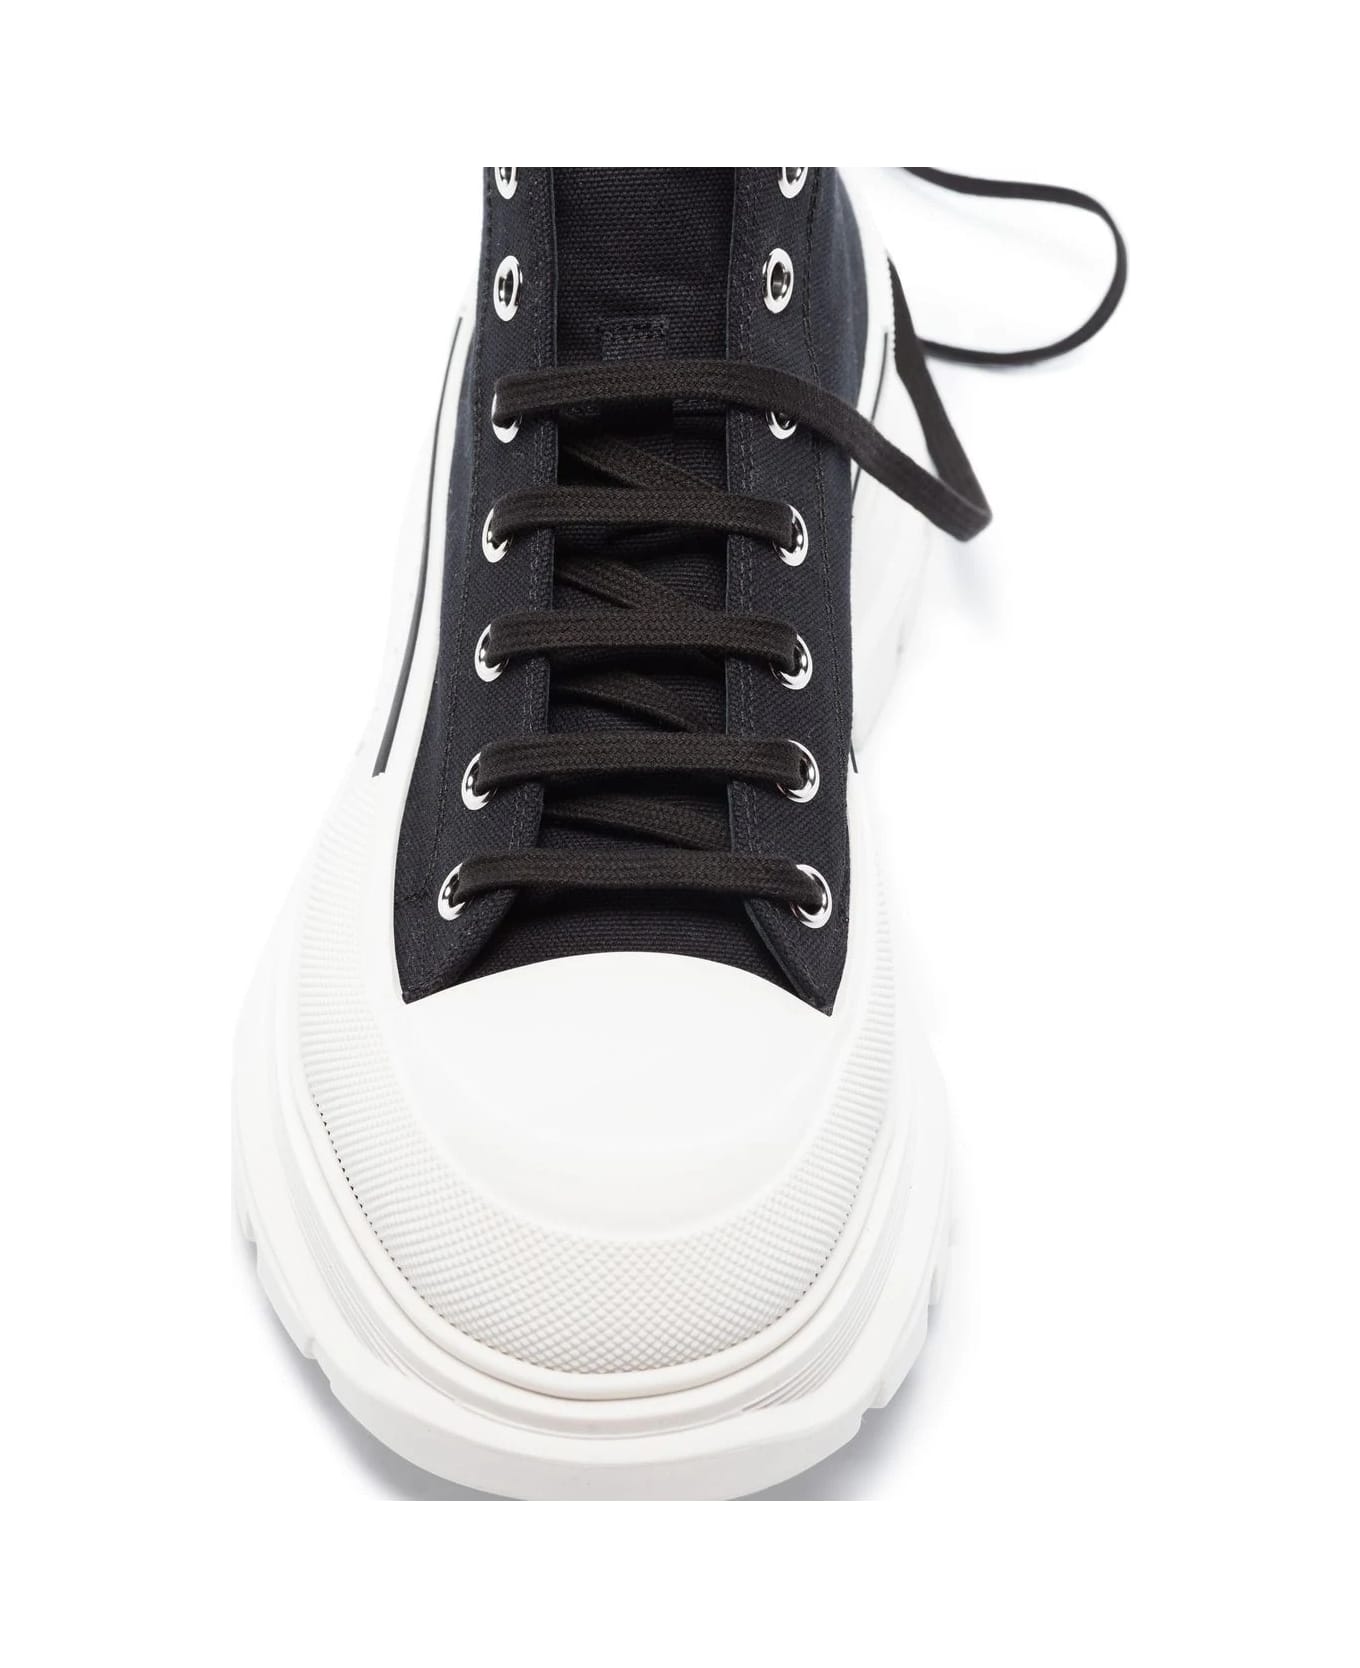 Alexander McQueen Black And White Tread Slick Ankle Boots - Black